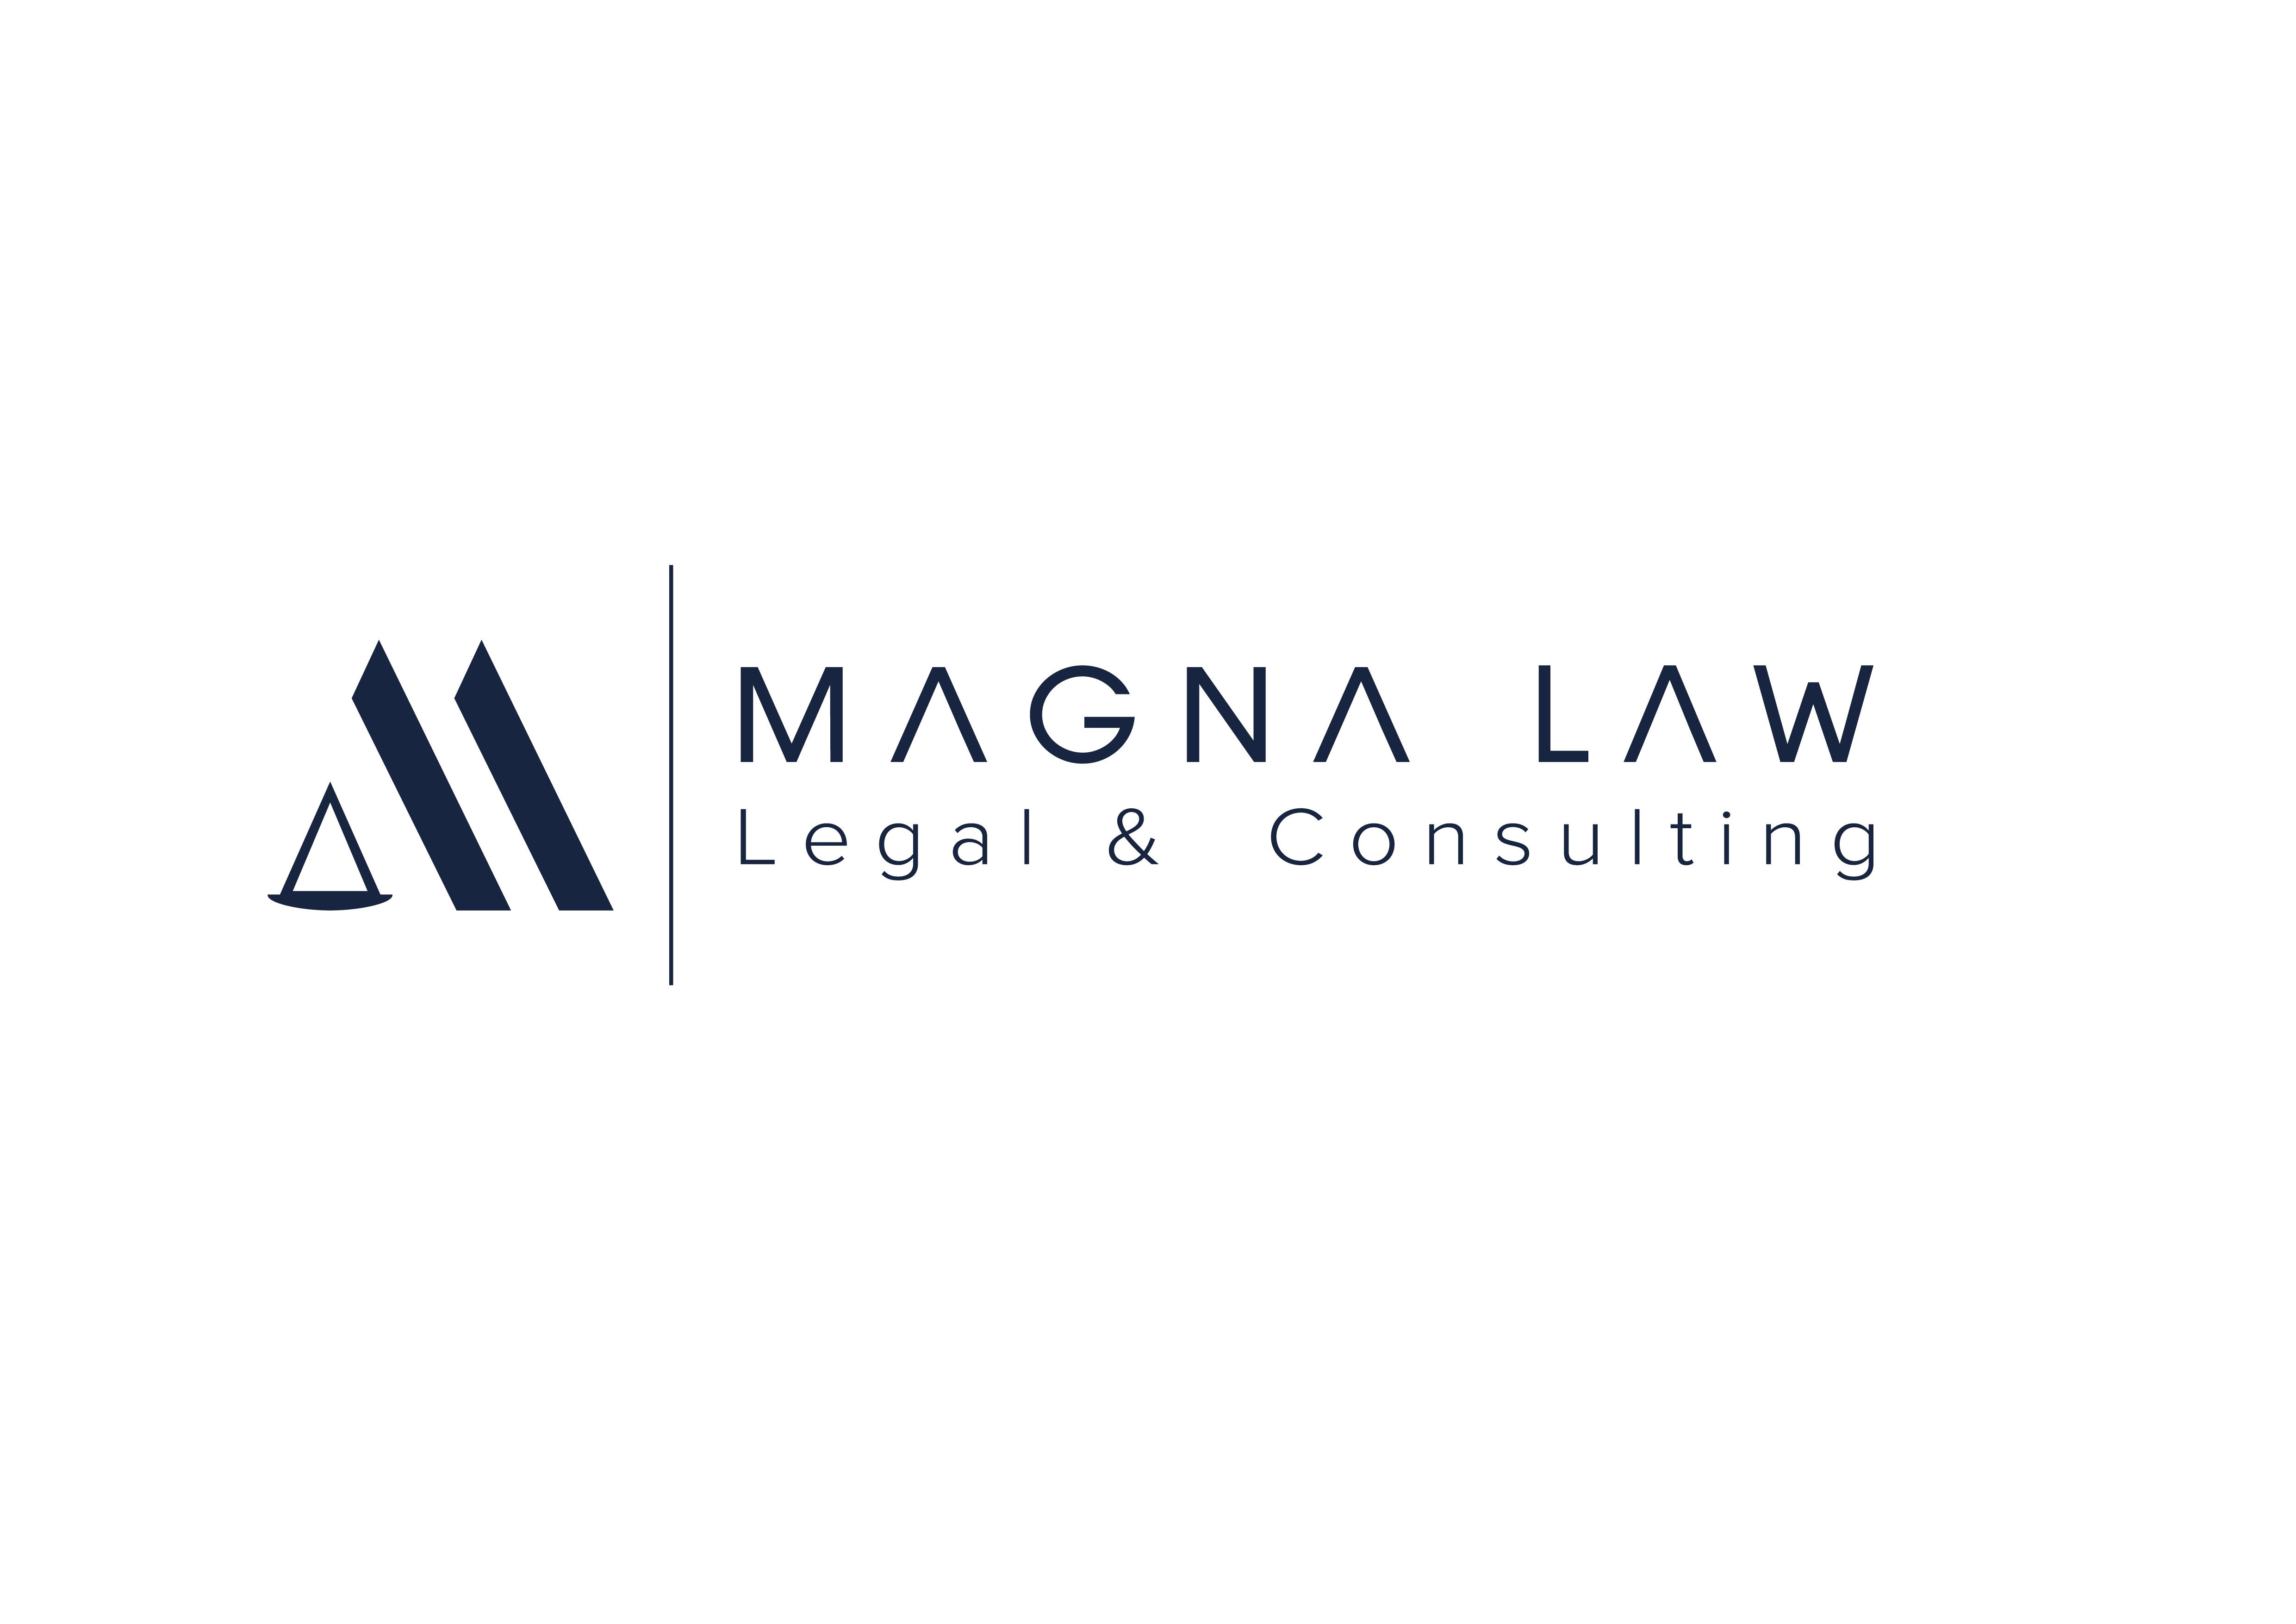 Magna Law Legal & Consulting | LinkedIn